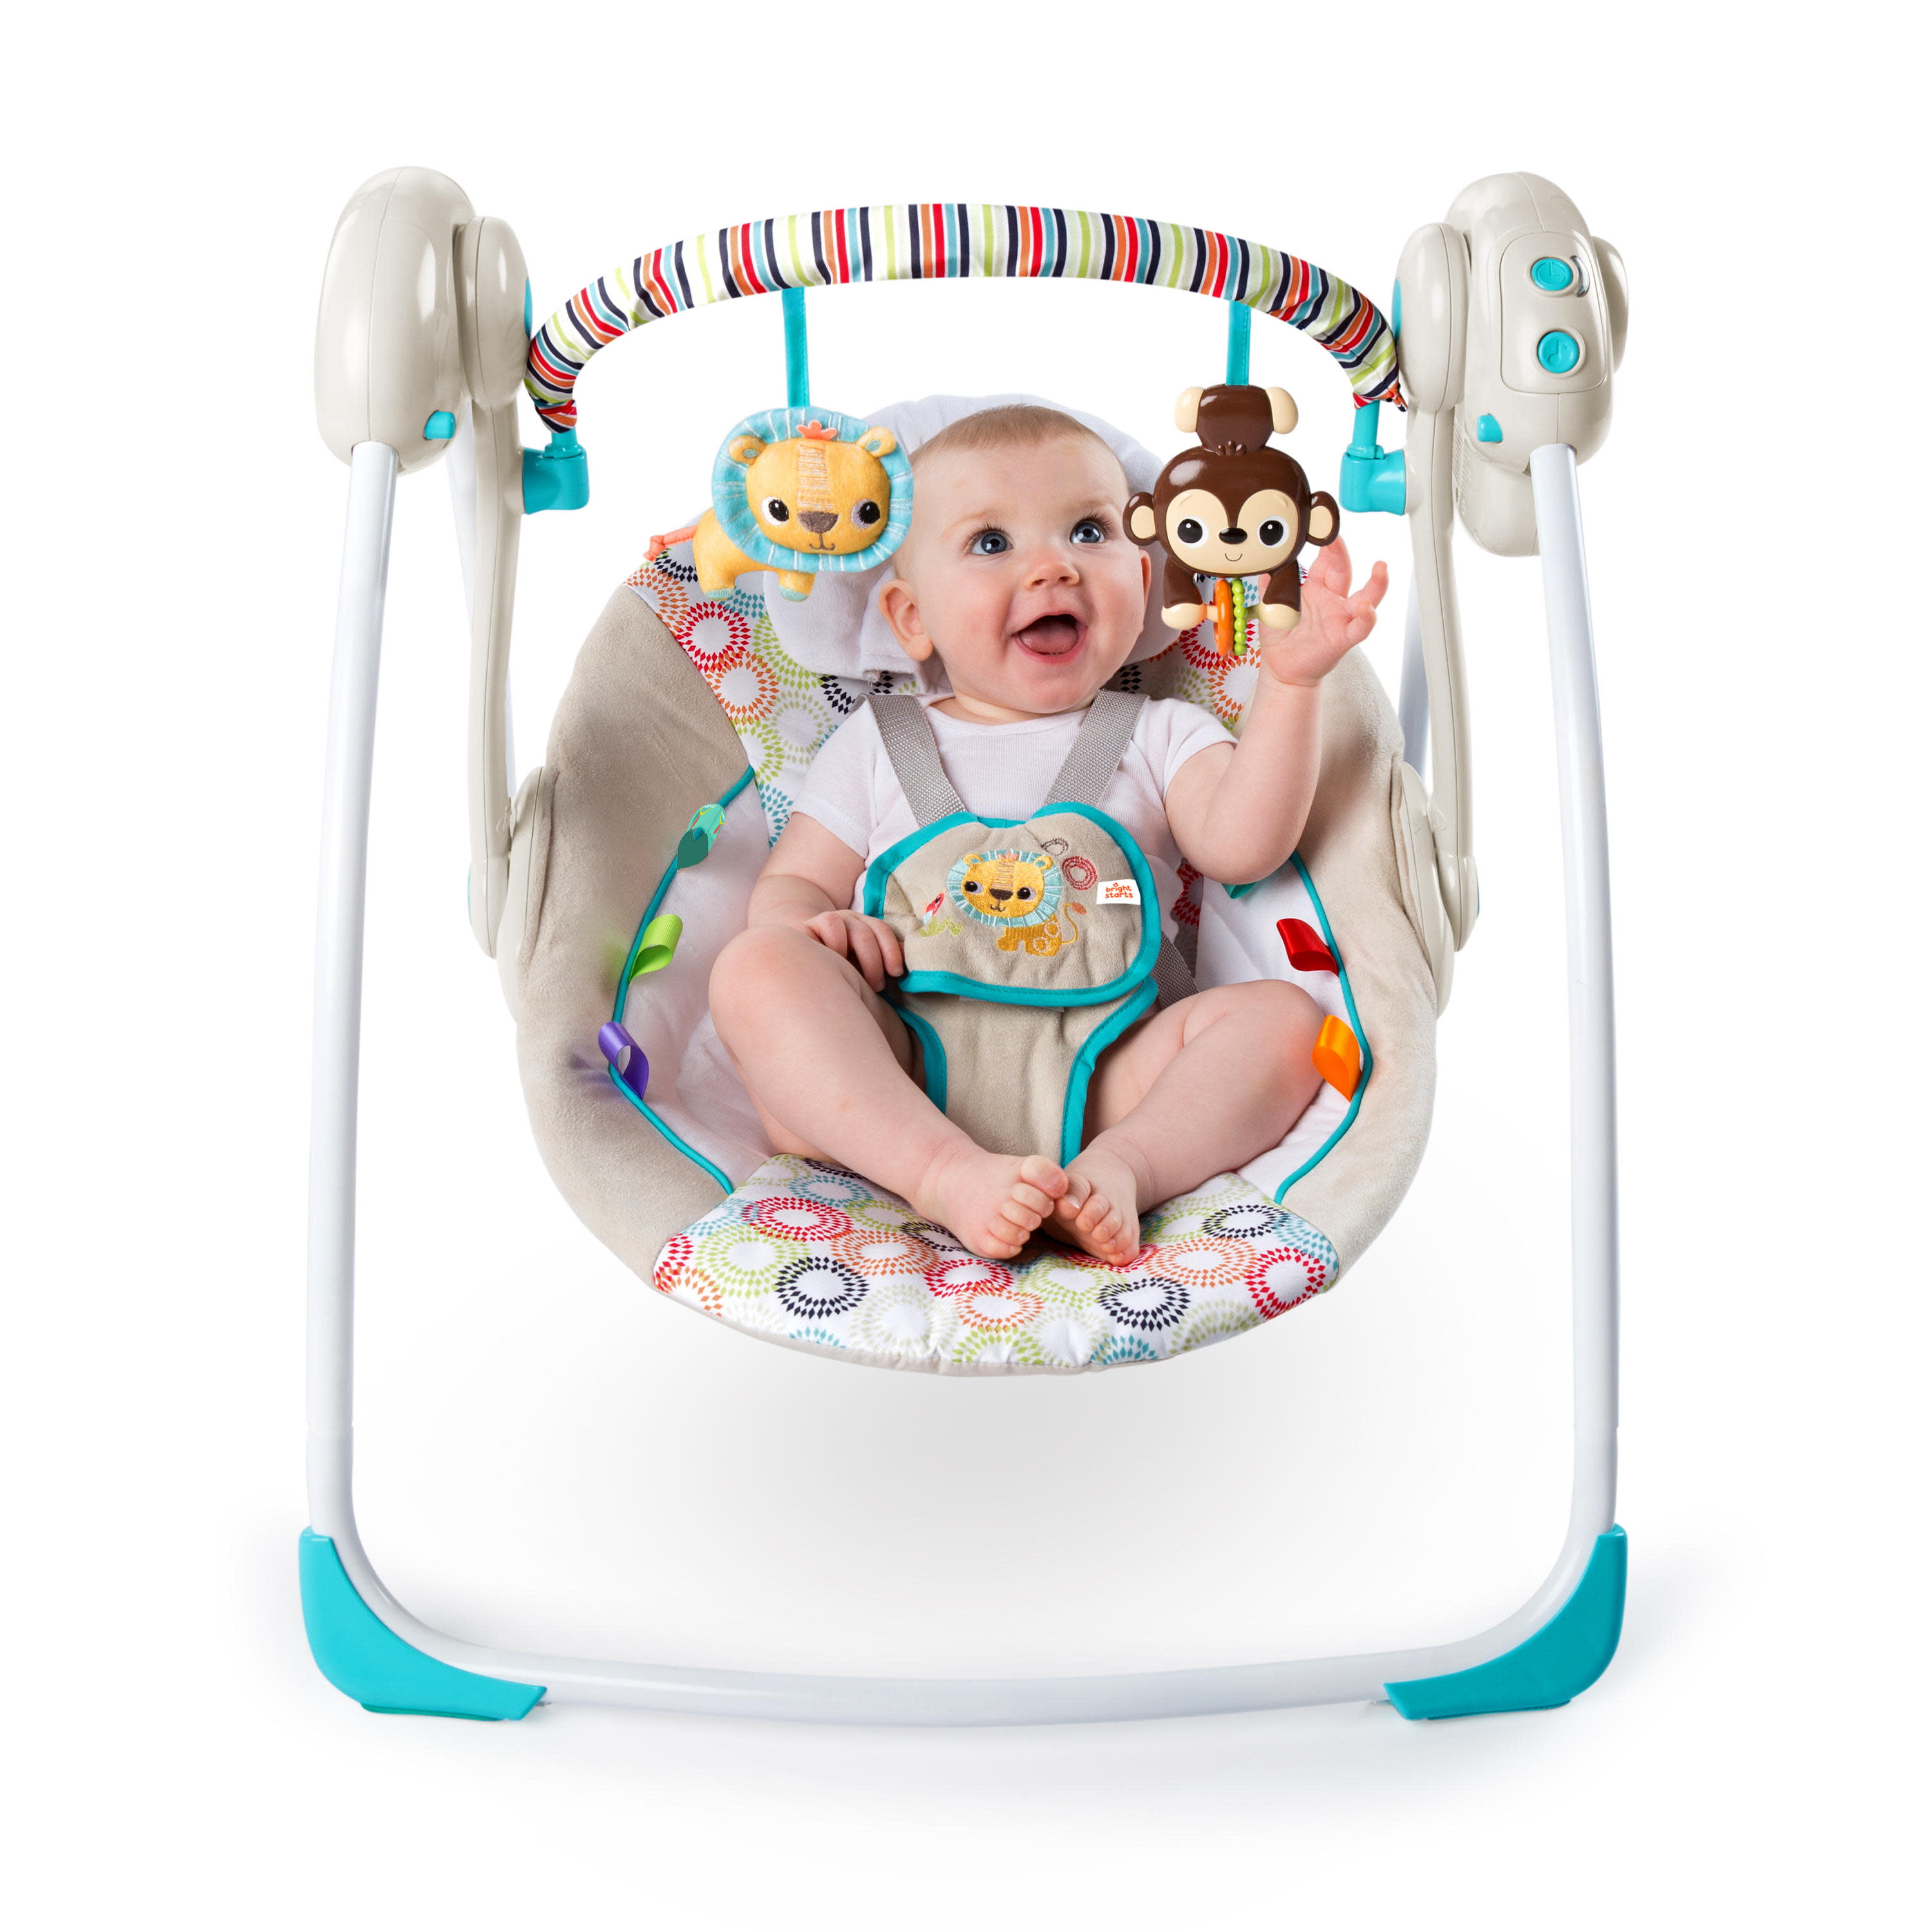  Bright Starts Portable Automatic 6-Speed Baby Swing with  Adaptable Speed, Taggies, Music, Removable-Toy-Bar, 0-9 Months 6-20 lbs  (Whimsical Wild) : Baby